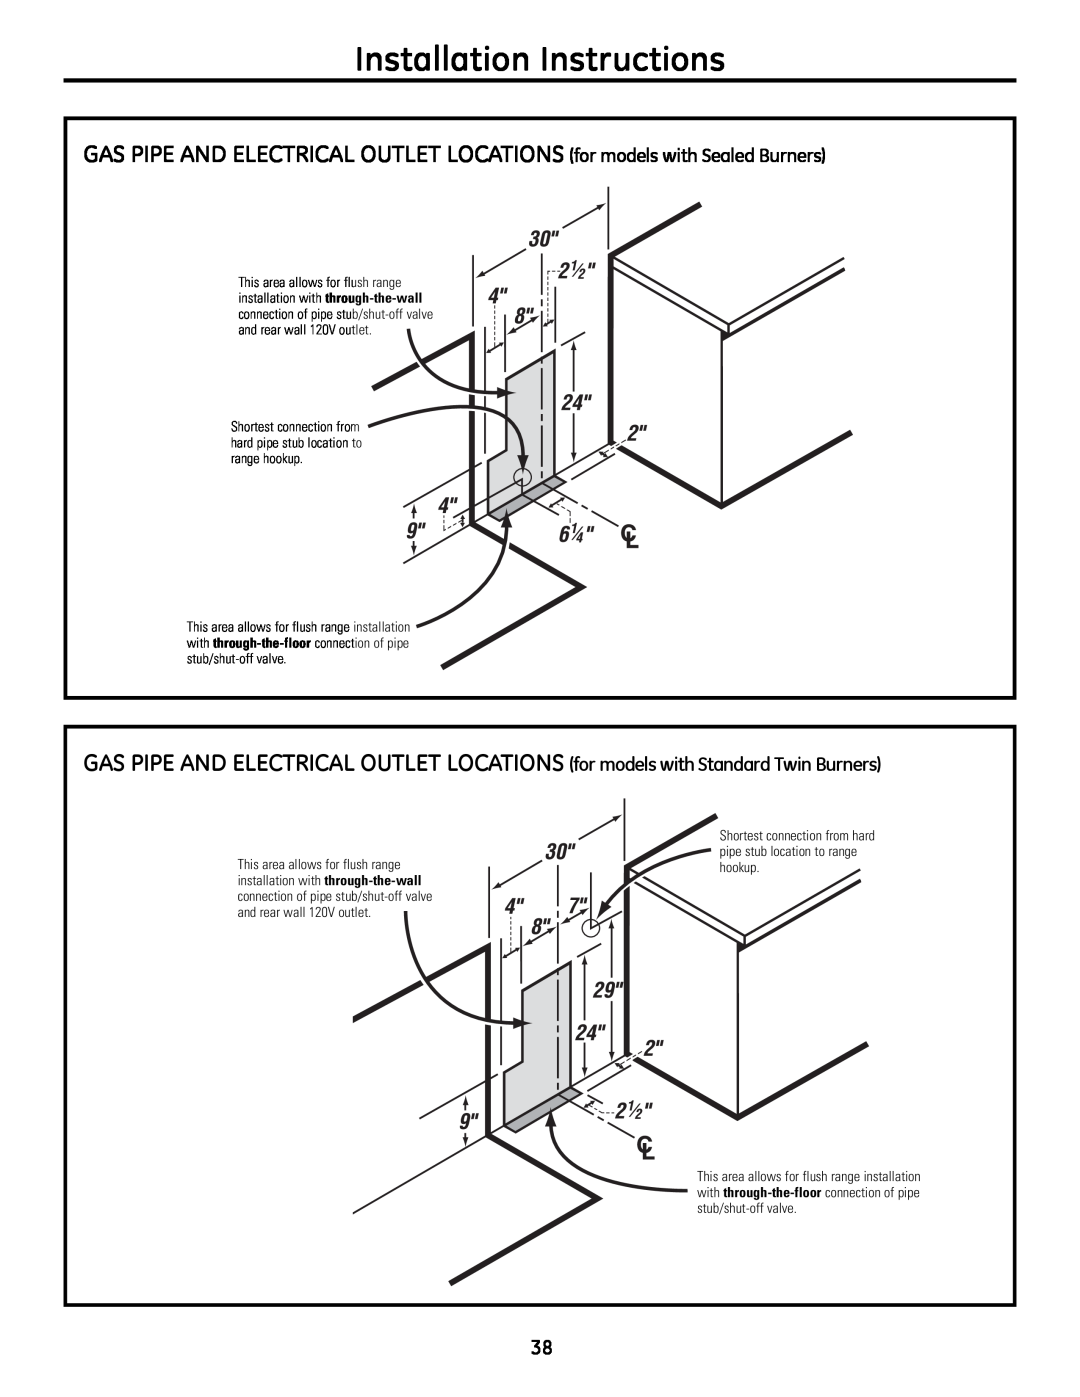 GE JgB290, JgB280 manual Installation Instructions, Shortest connection from hard pipe stub location to range hookup 